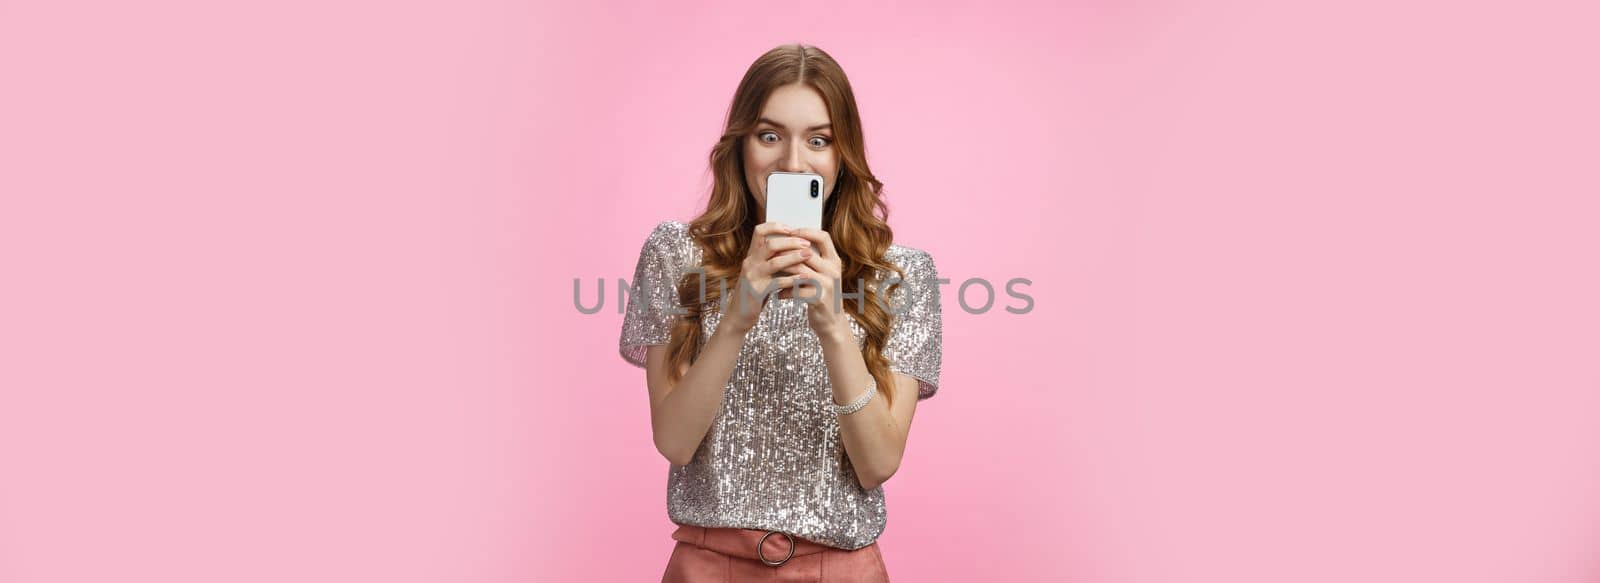 Amused curious good-looking stylish european glamour woman shopping online looking excited amazed smartphone screen find awesome sale promotion, standing thrilled texting hot fresh rumor friend.